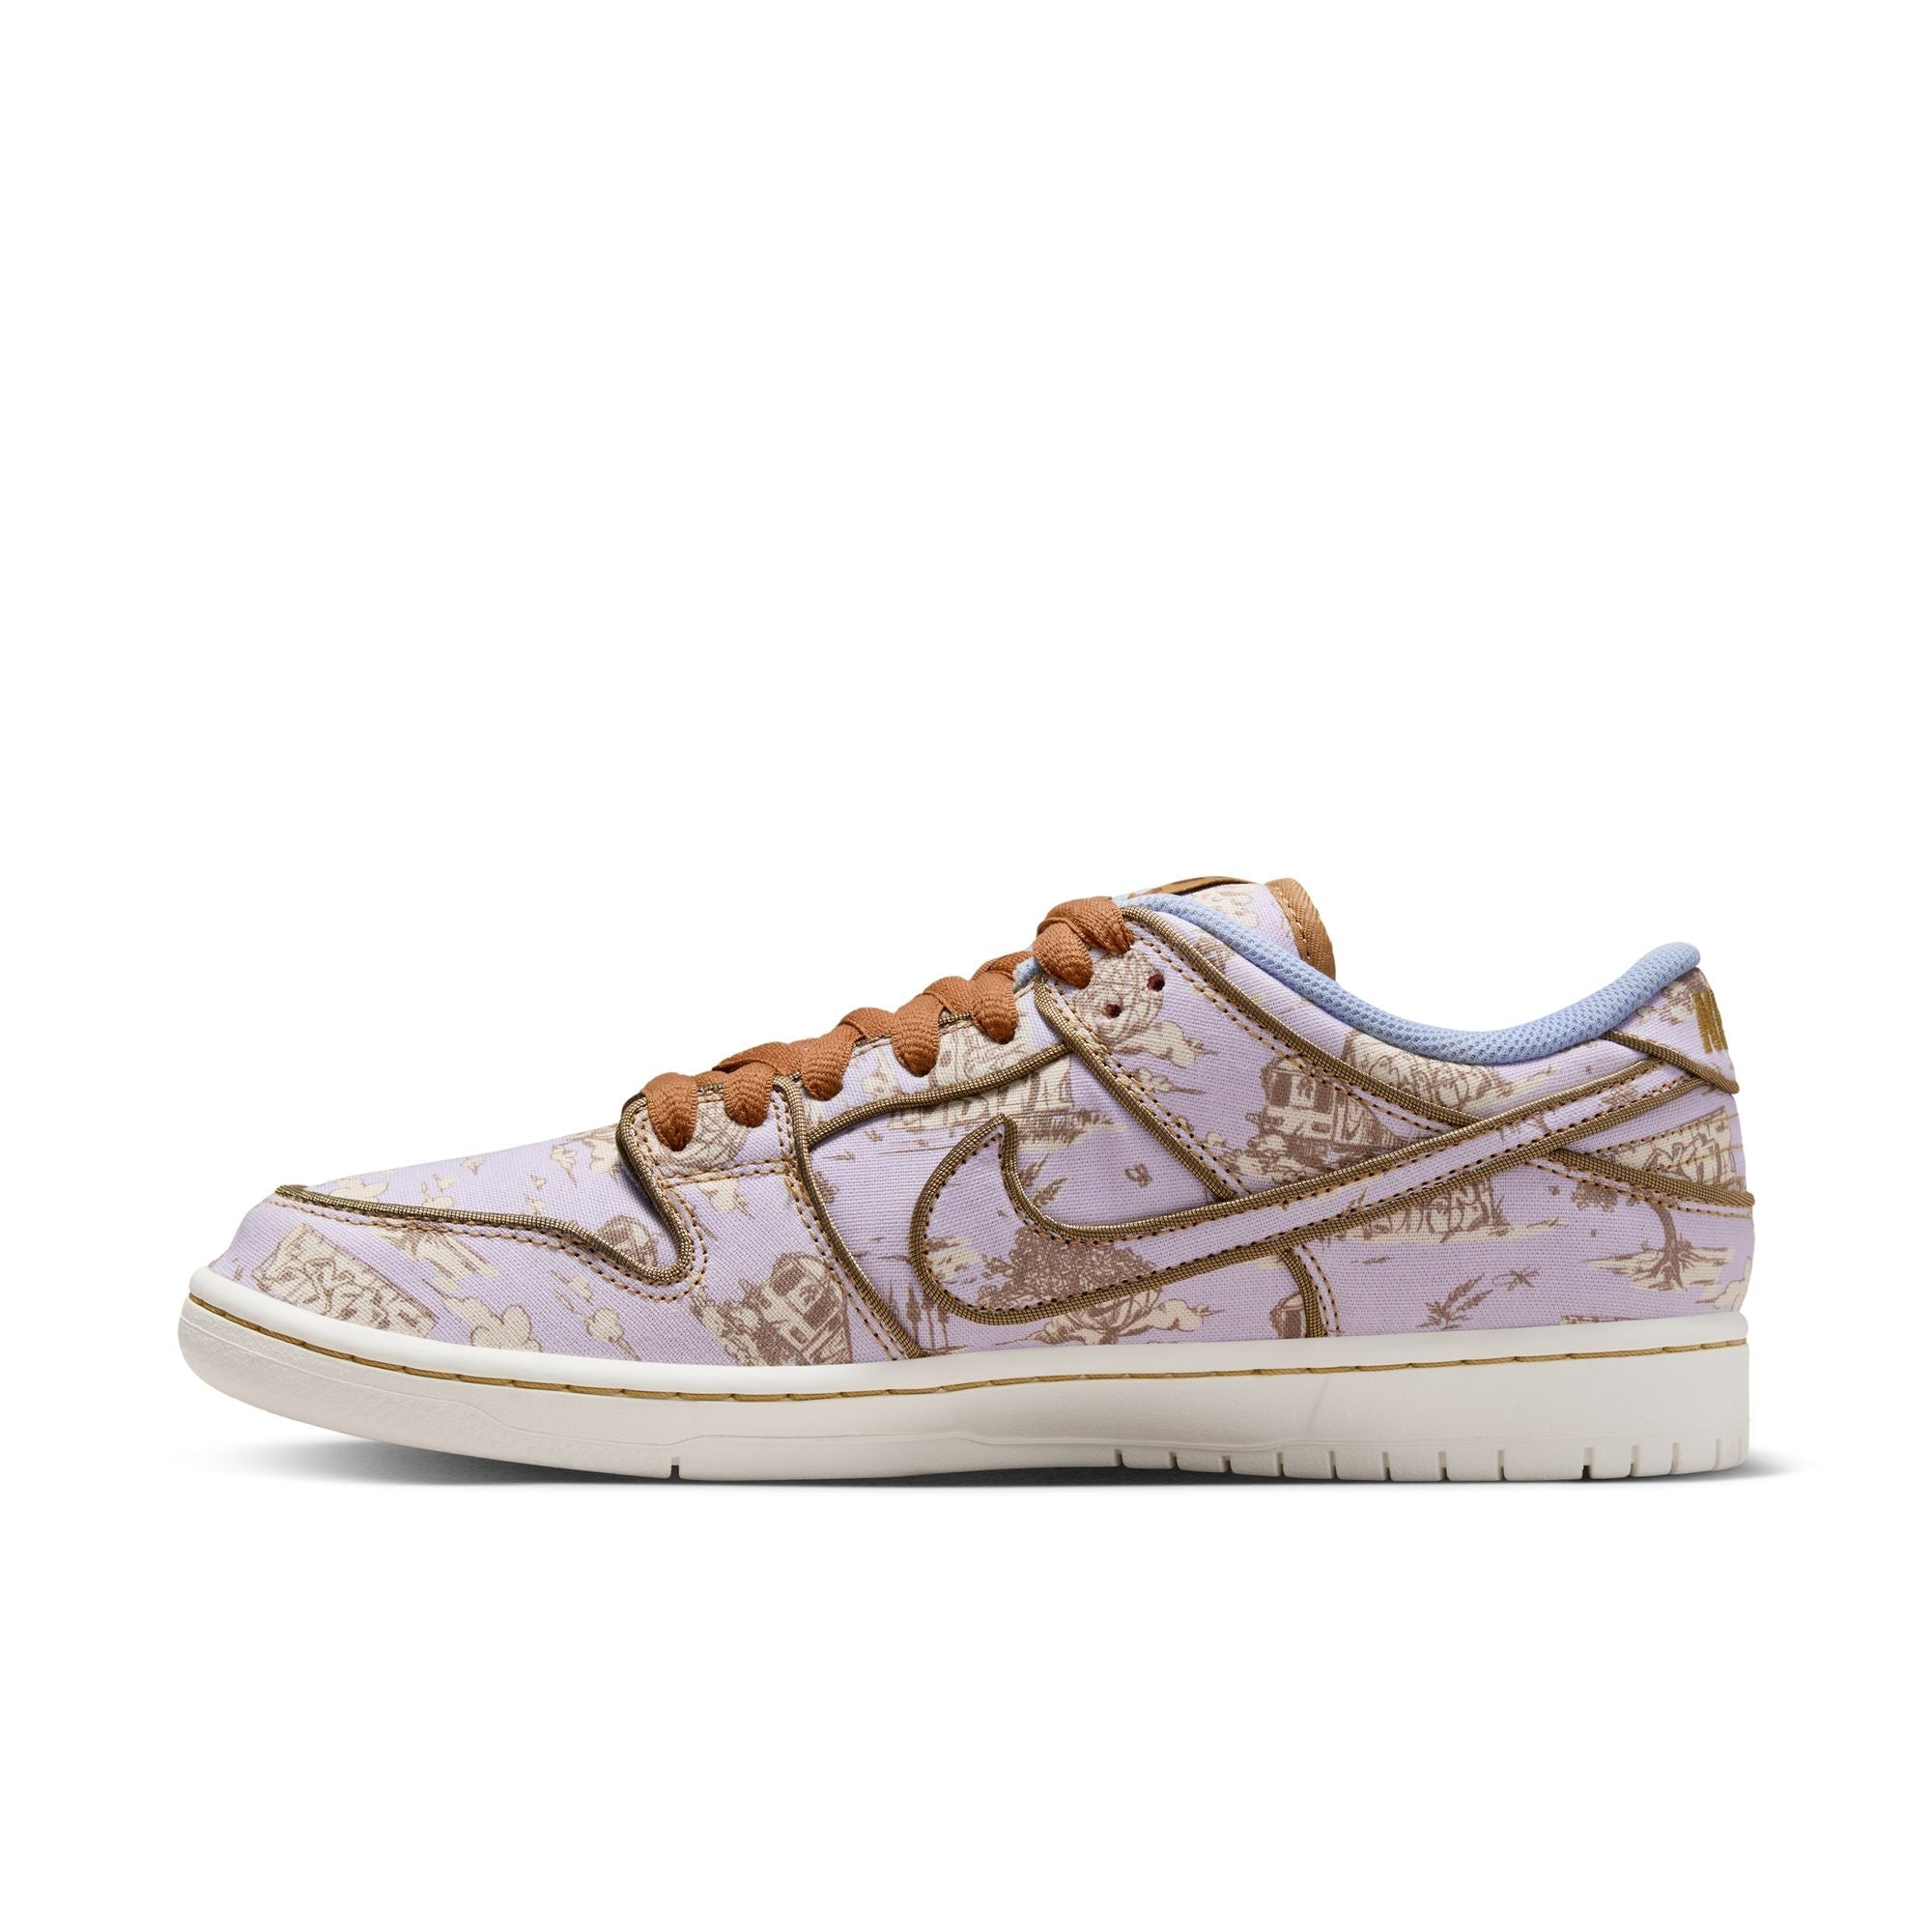 Purple Nike sb dunk low pro premium shoes with pastoral print, white midsole and brown laces. Free uk shipping over £50